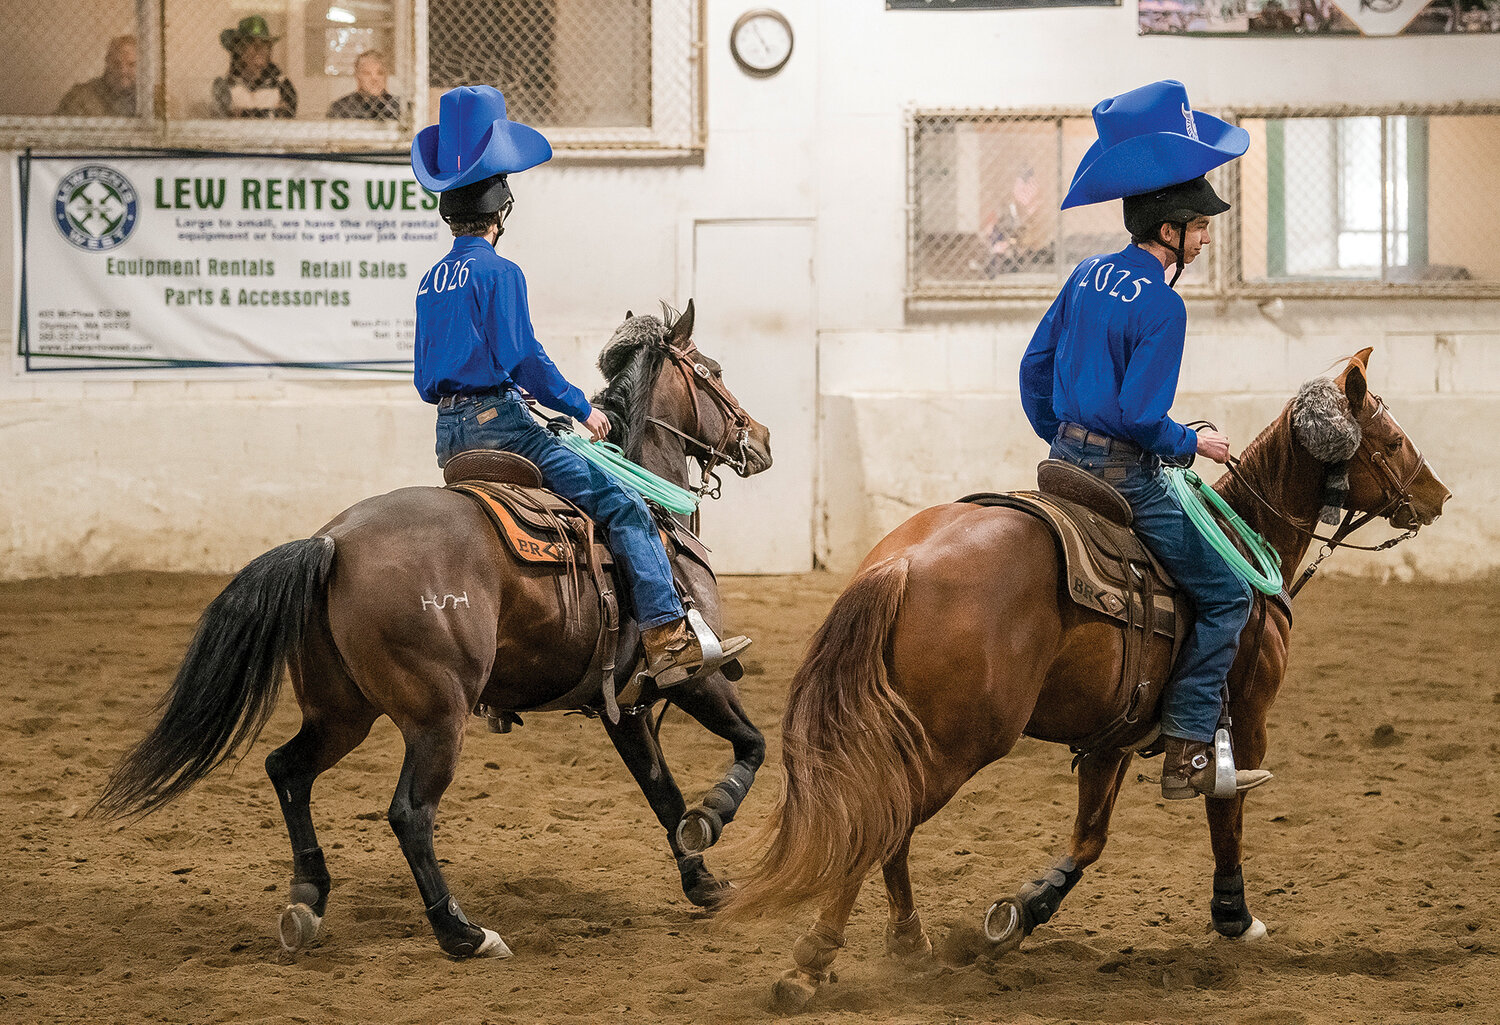 Hockinson juniors Braden and Trent Roth, who are twins, sport big goofy cowboy hats for a “working pairs” costumed performance in Tacoma on Saturday, April 15 for the team’s final district meet of the season.